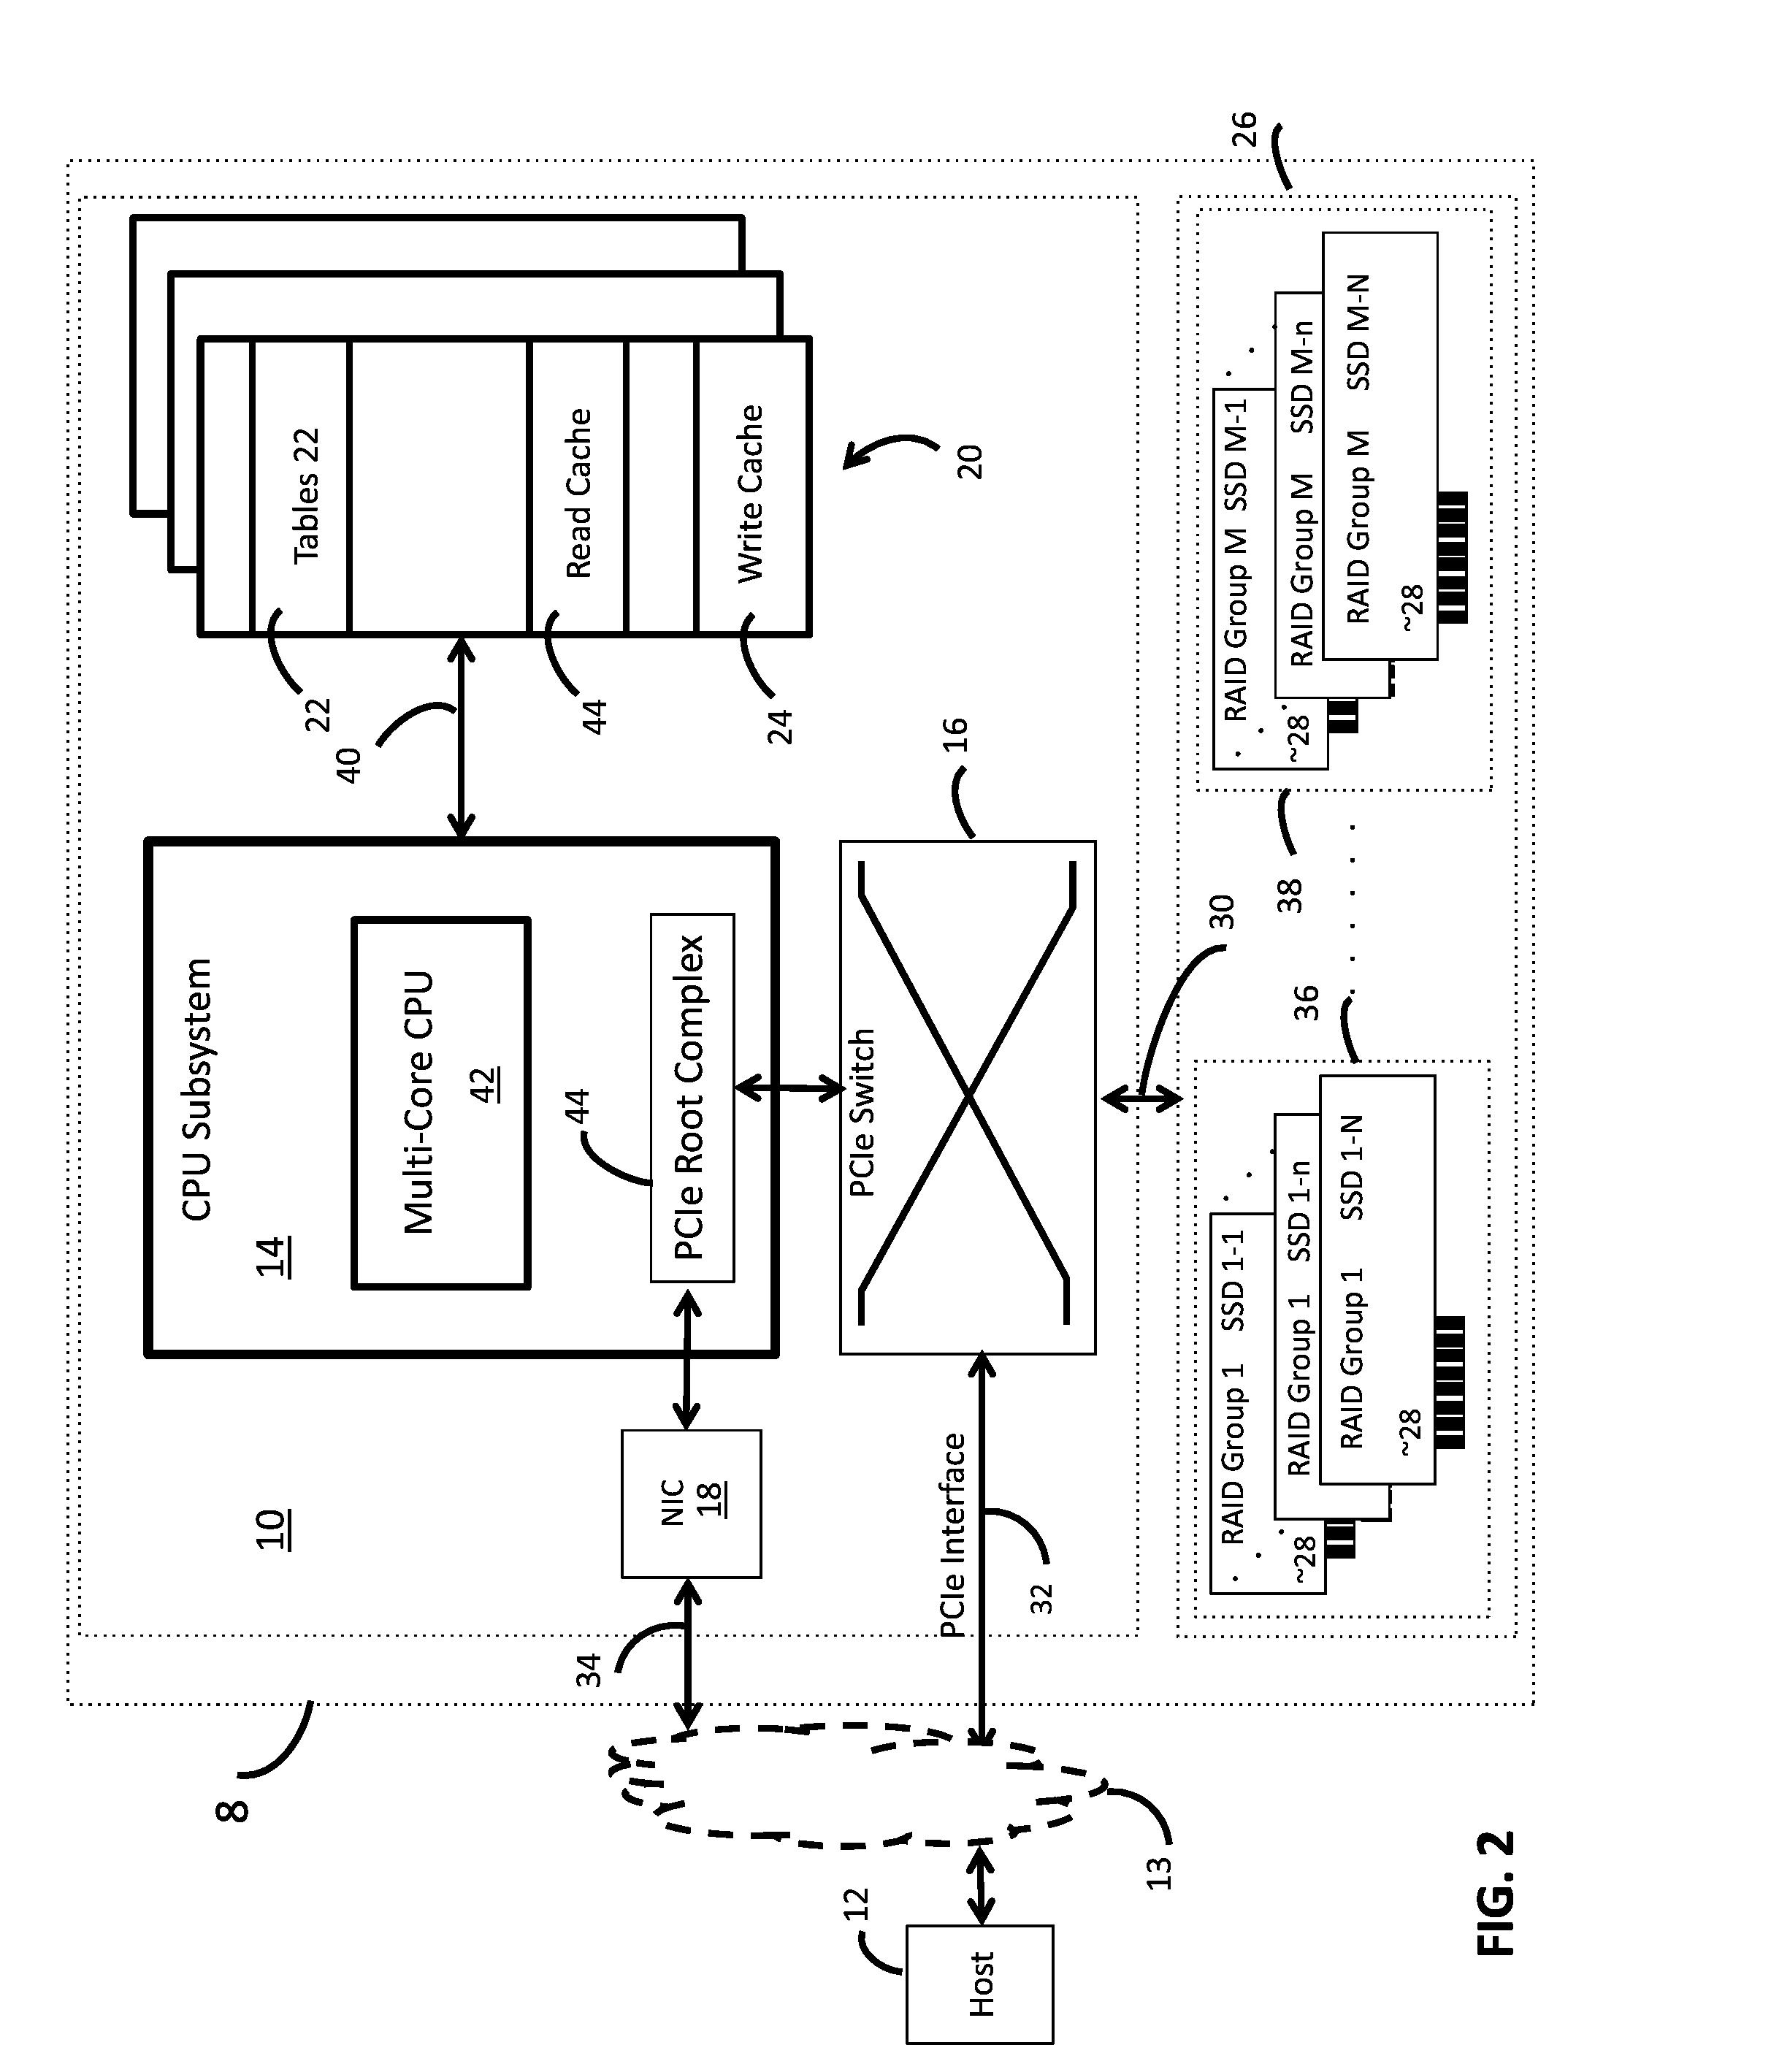 METHOD AND APPARATUS FOR DE-DUPLICATION FOR SOLID STATE DISKs (SSDs)